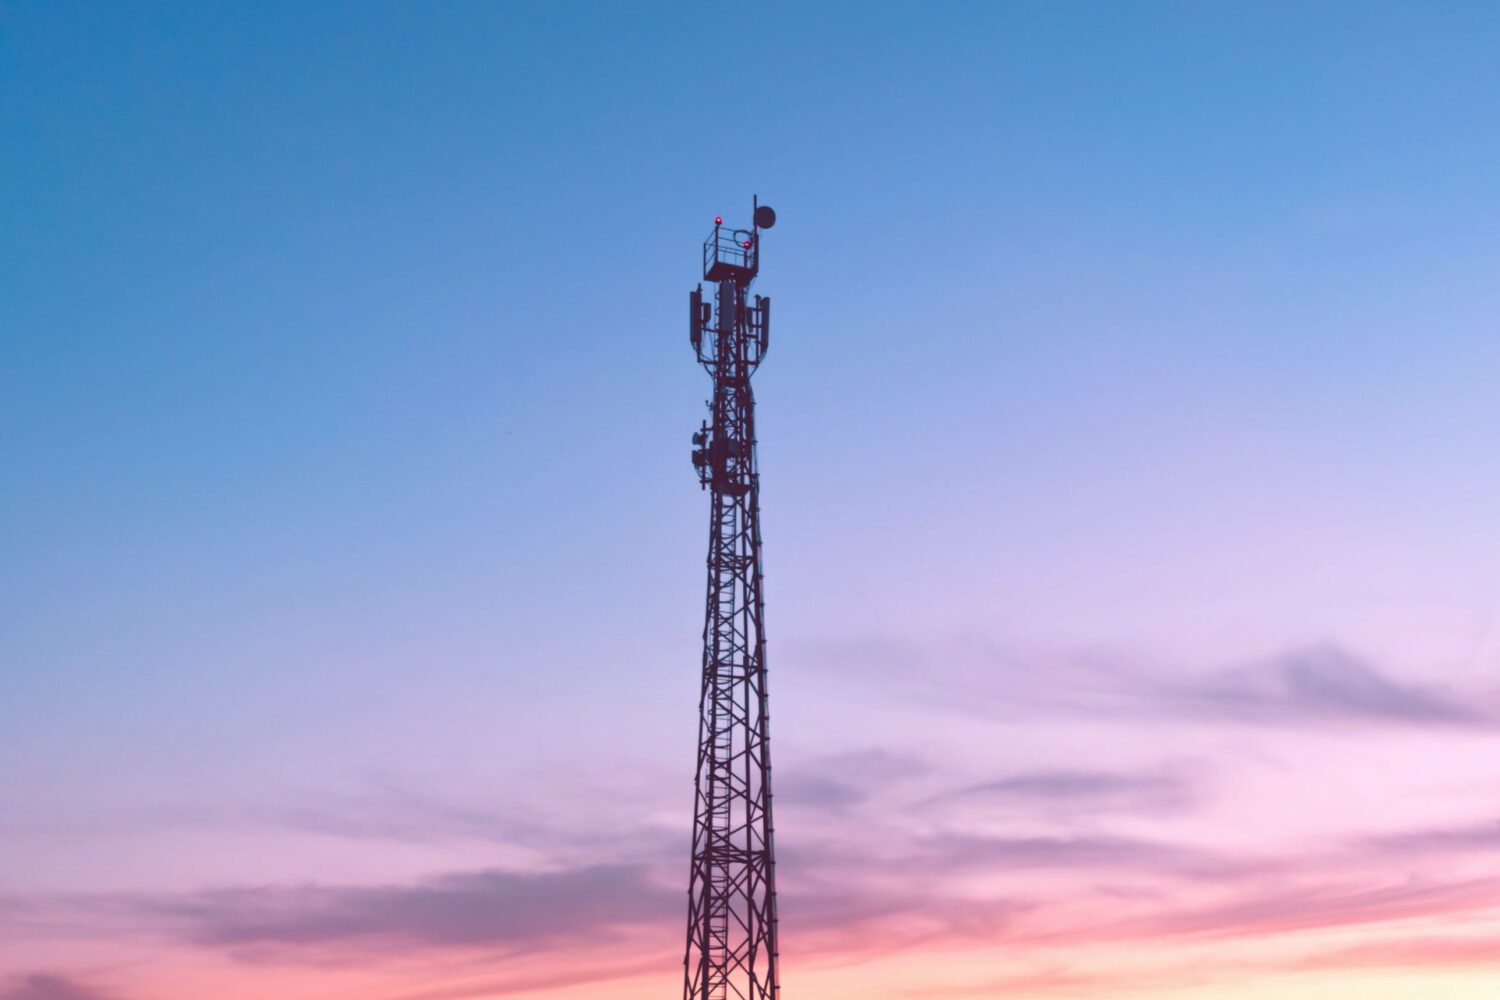 A cellular tower at dusk